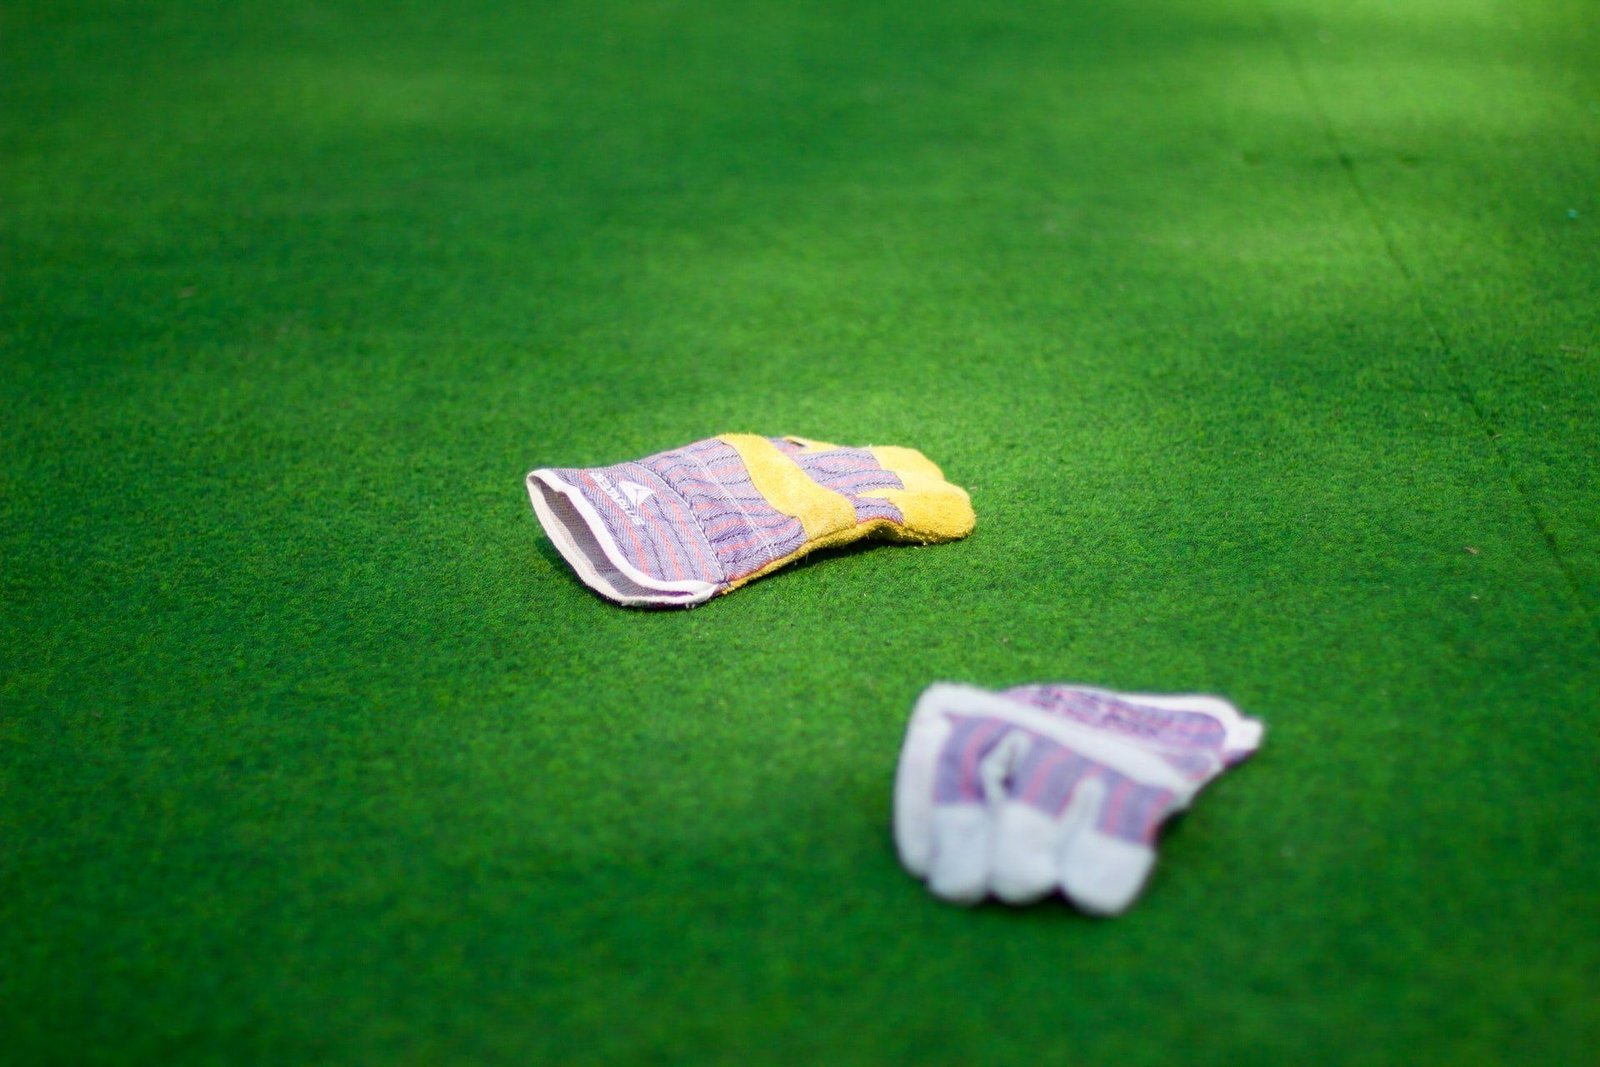 Two colorful gardening gloves are lying on a well-maintained, vibrant green Scottsdale artificial turf. One glove is partially folded over itself, while the other glove is laid out more flatly. The scene is sunlit, highlighting the gloves against the grass, perfect for any sport turf installer Scottsdale AZ could recommend.